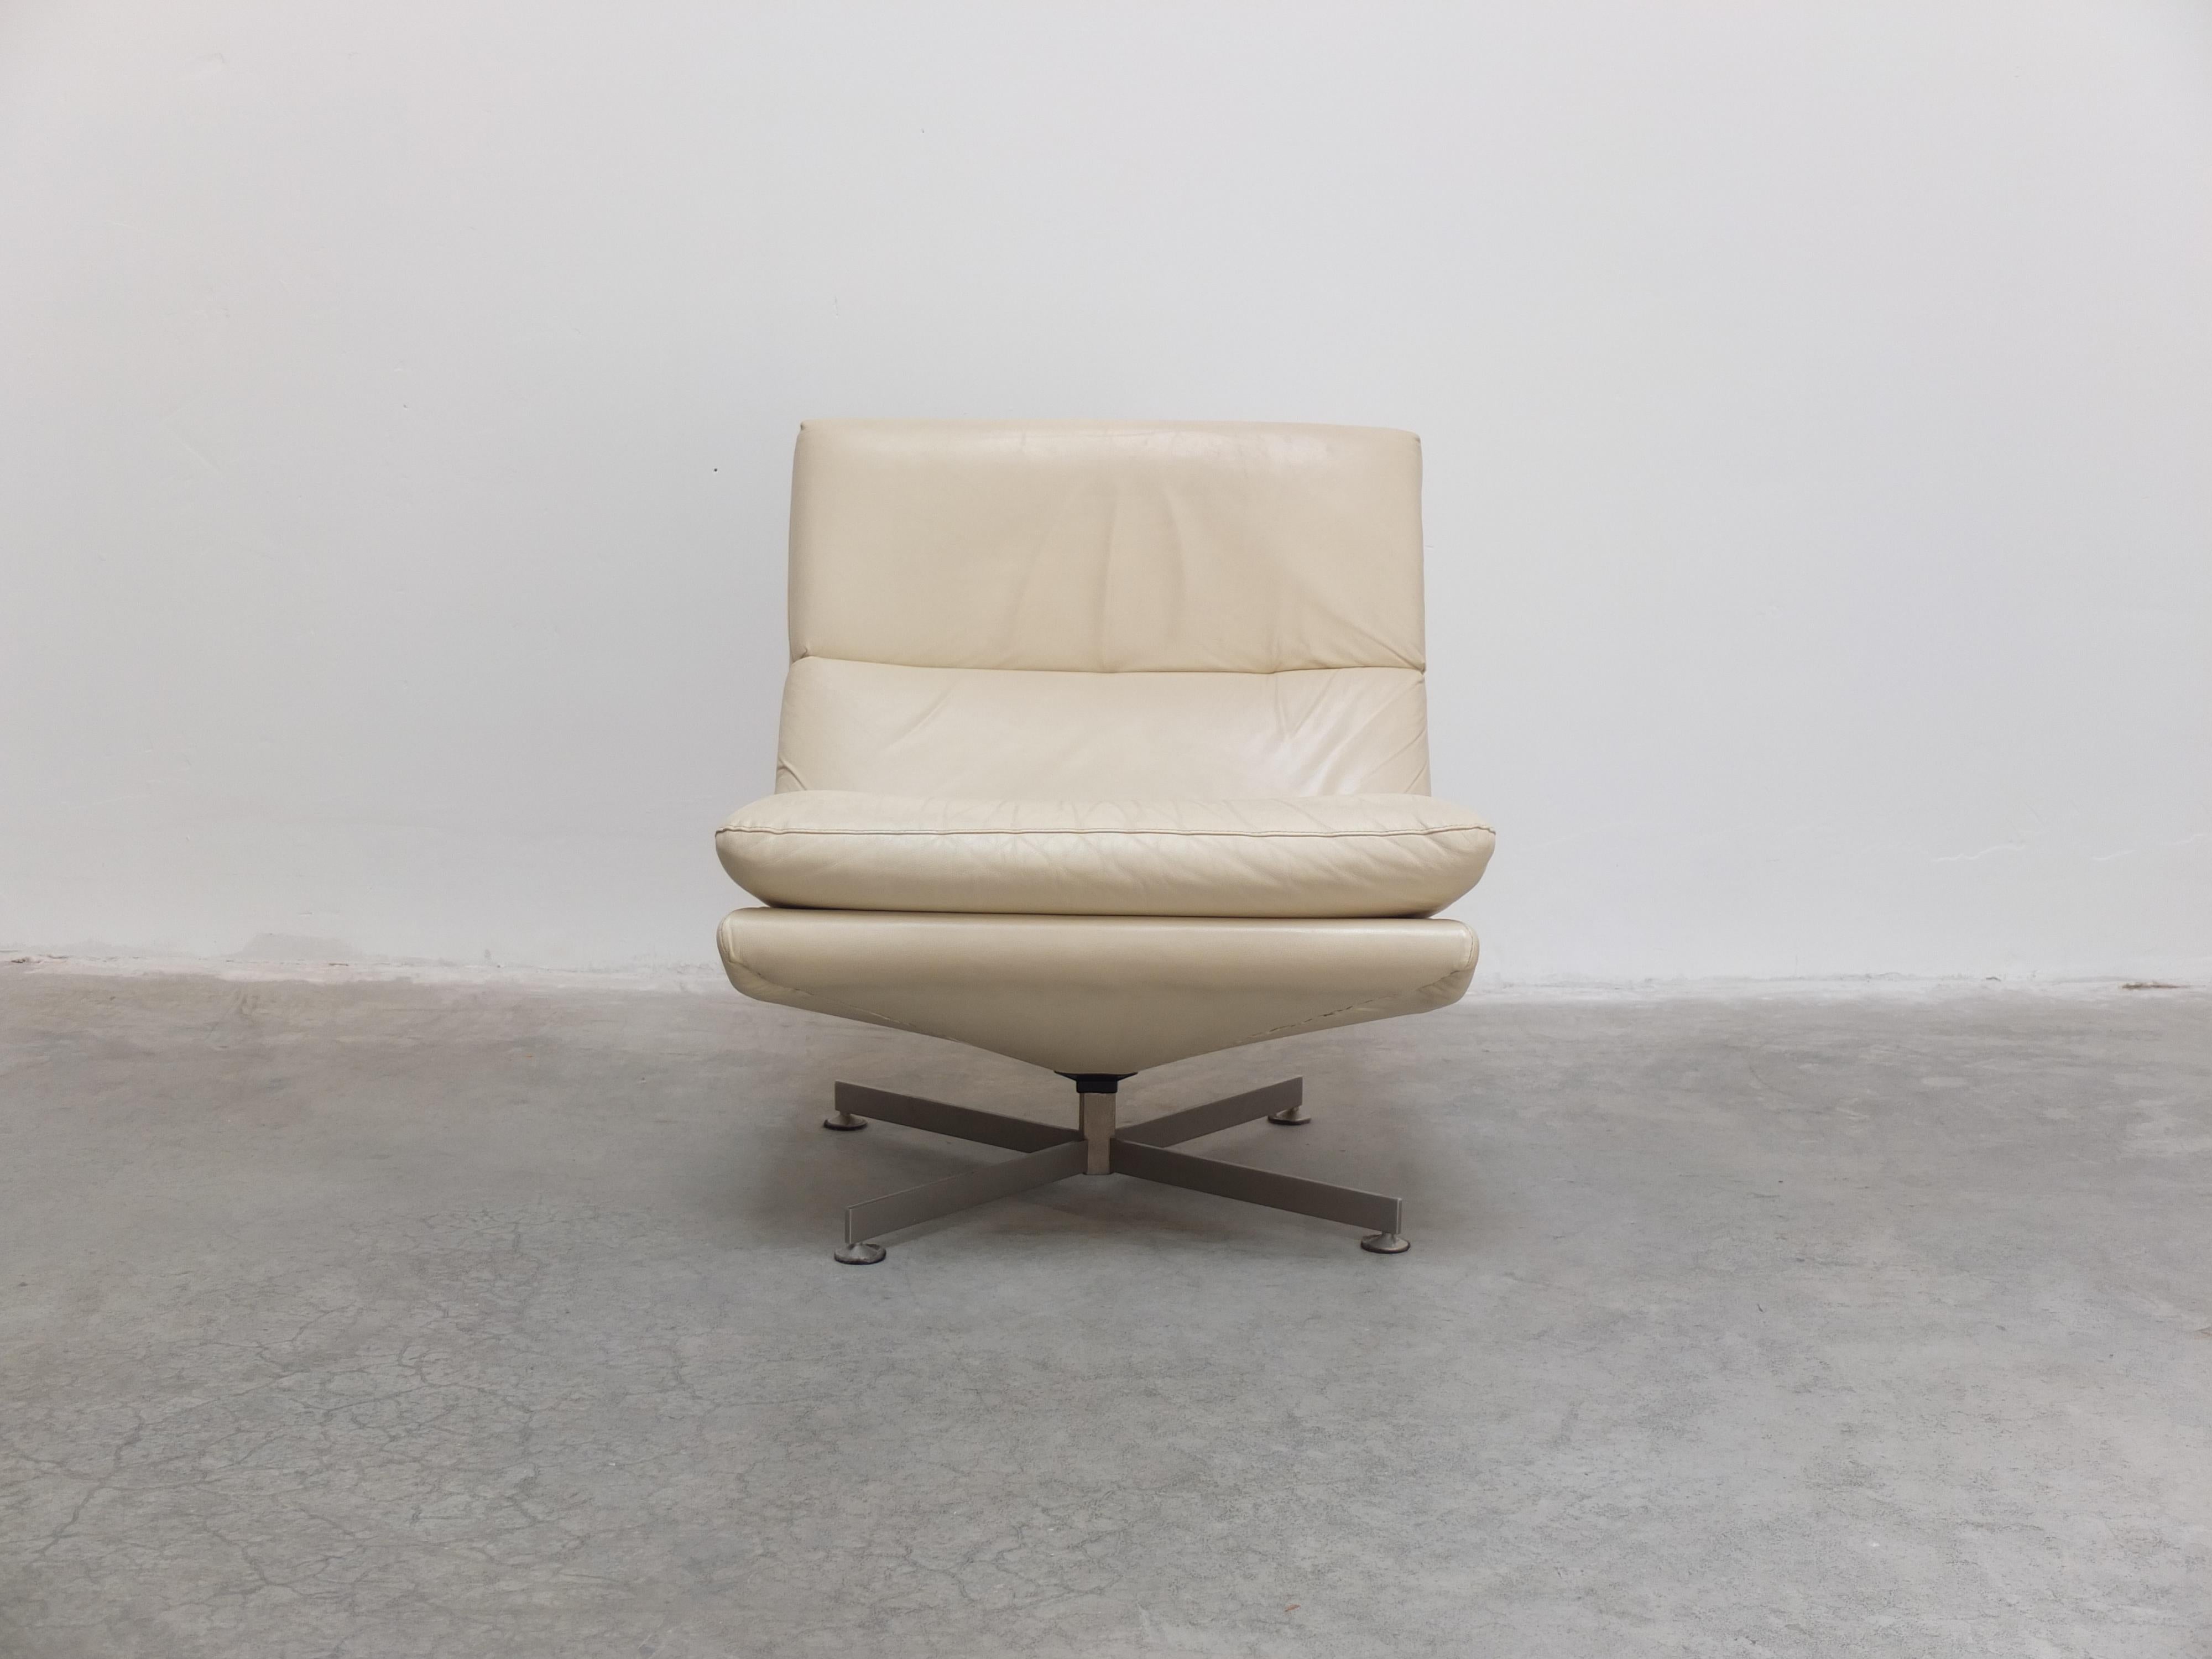 A rare Belgian modernist lounge chair designed by Georges Van Rijck for Beaufort during the 1960s. Featuring a slim metal star-shaped base with a practical swivel function. All chairs are professionally reupholstered with a high quality